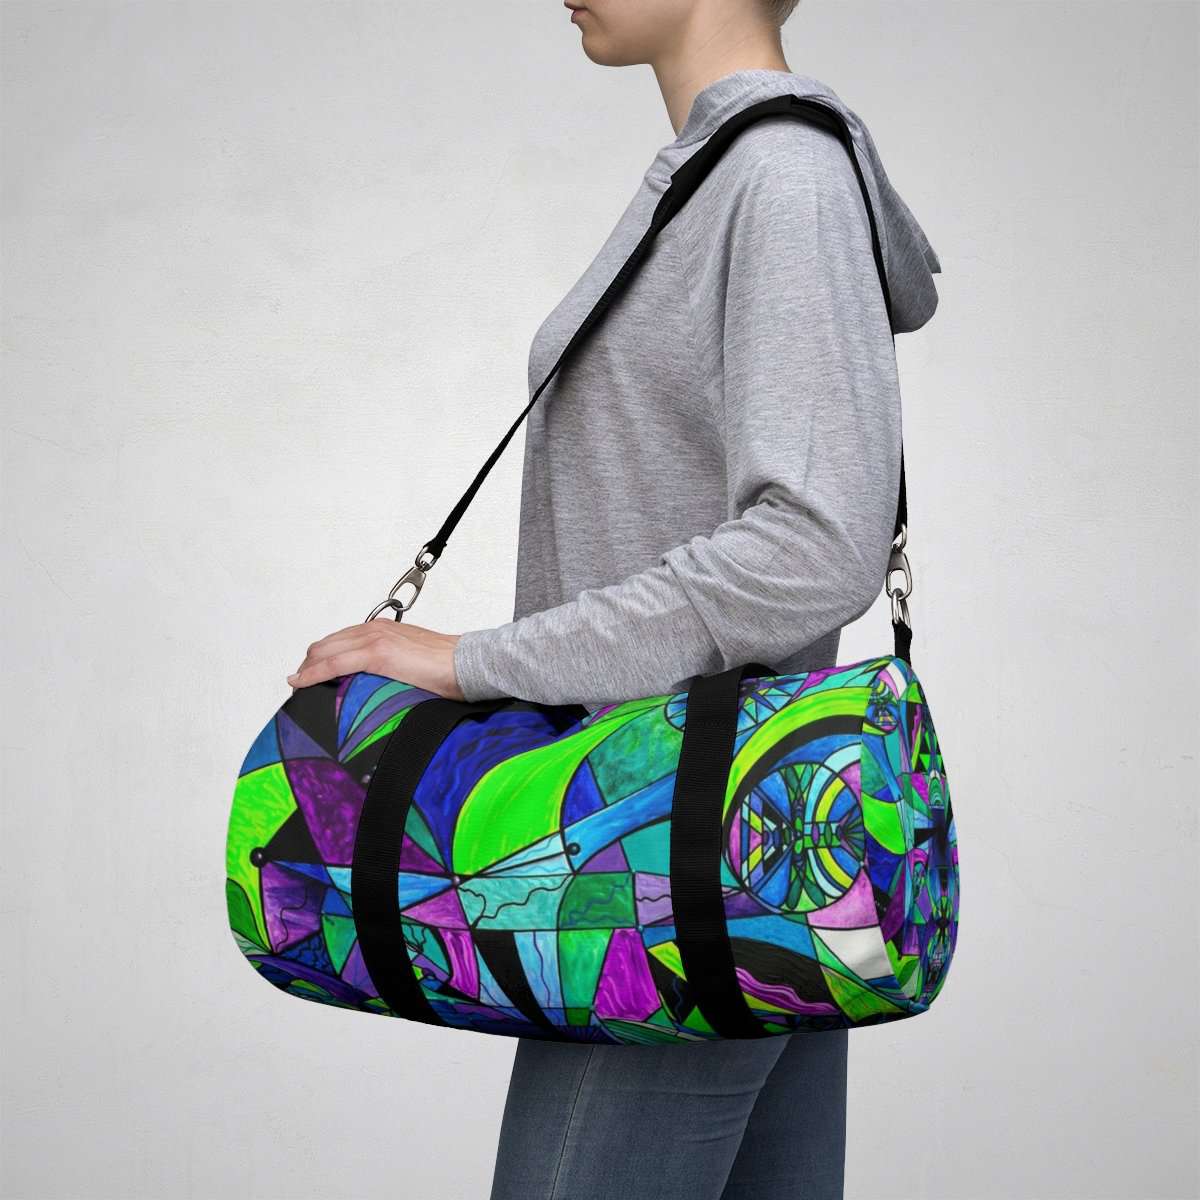 shop-online-and-get-your-favourite-arcturian-astral-travel-grid-duffle-bag-online_5.jpg